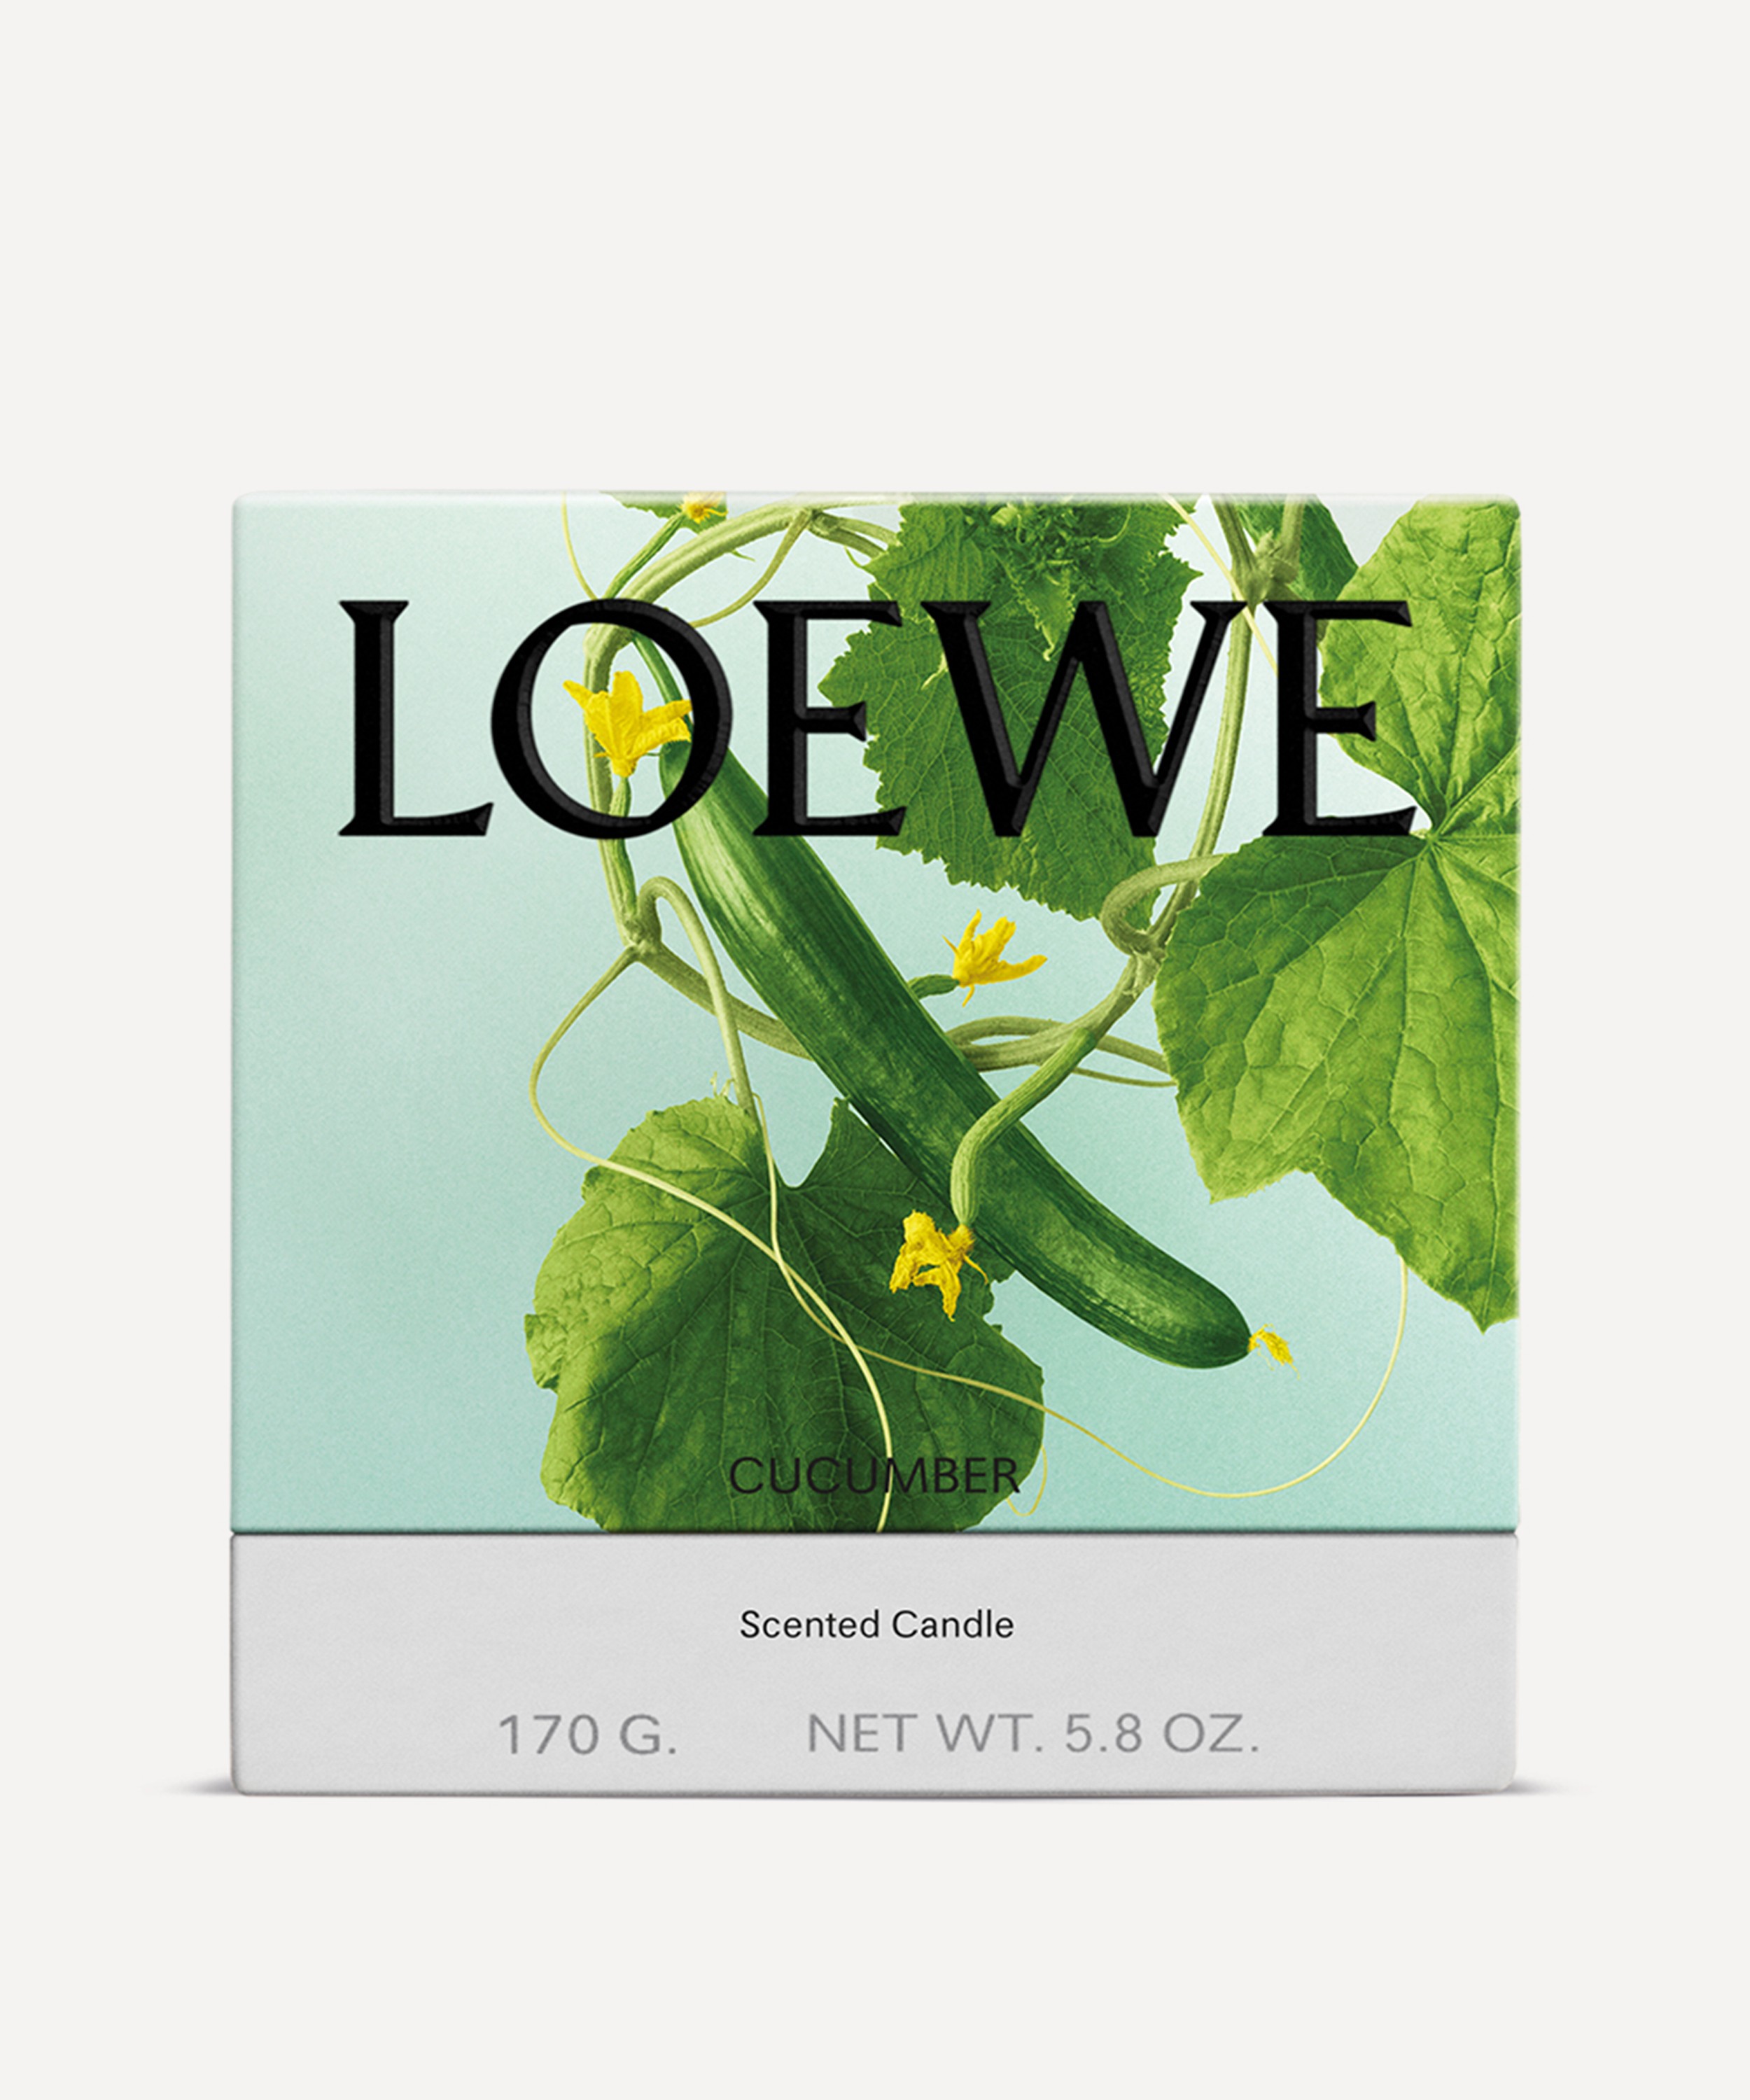 Loewe - Small Cucumber Candle 170g image number 2